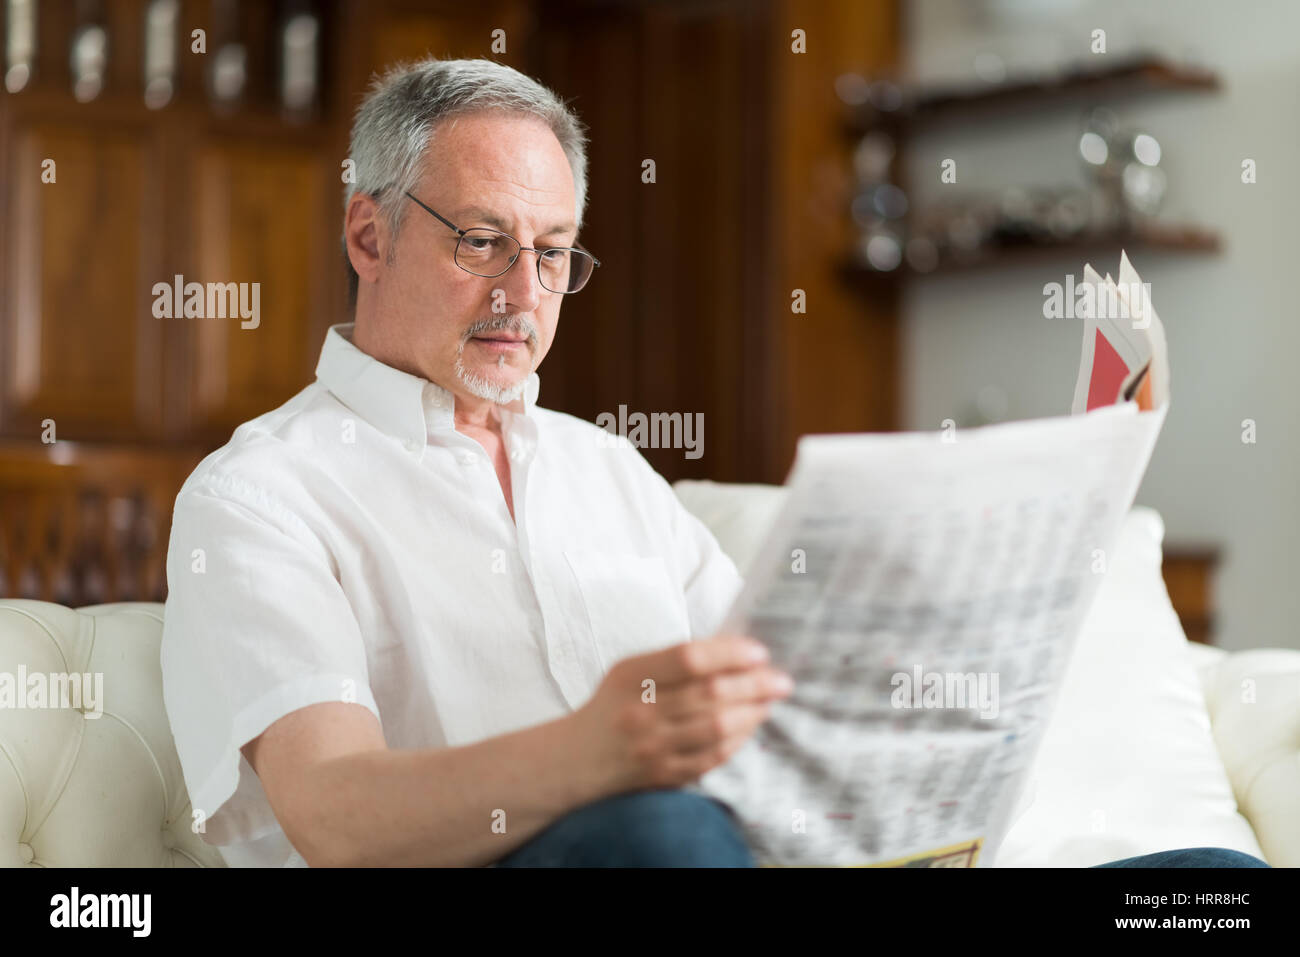 Portrait of a mature man reading a newspaper Stock Photo